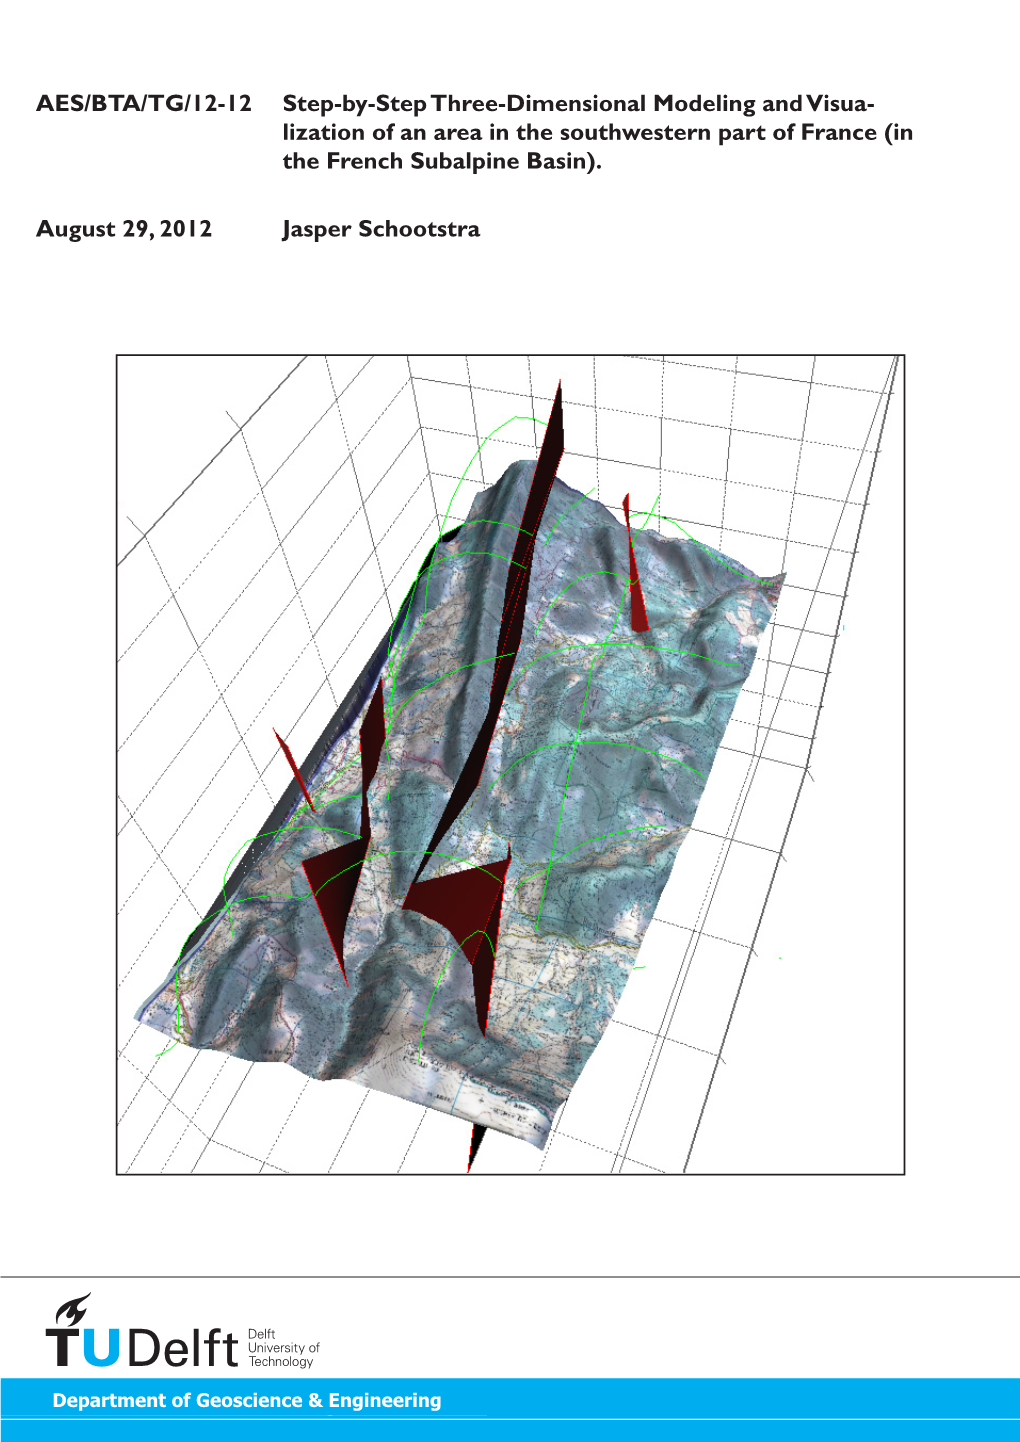 AES/BTA/TG/12-12 Step-By-Step Three-Dimensional Modeling and Visua- Lization of an Area in the Southwestern Part of France (In the French Subalpine Basin)